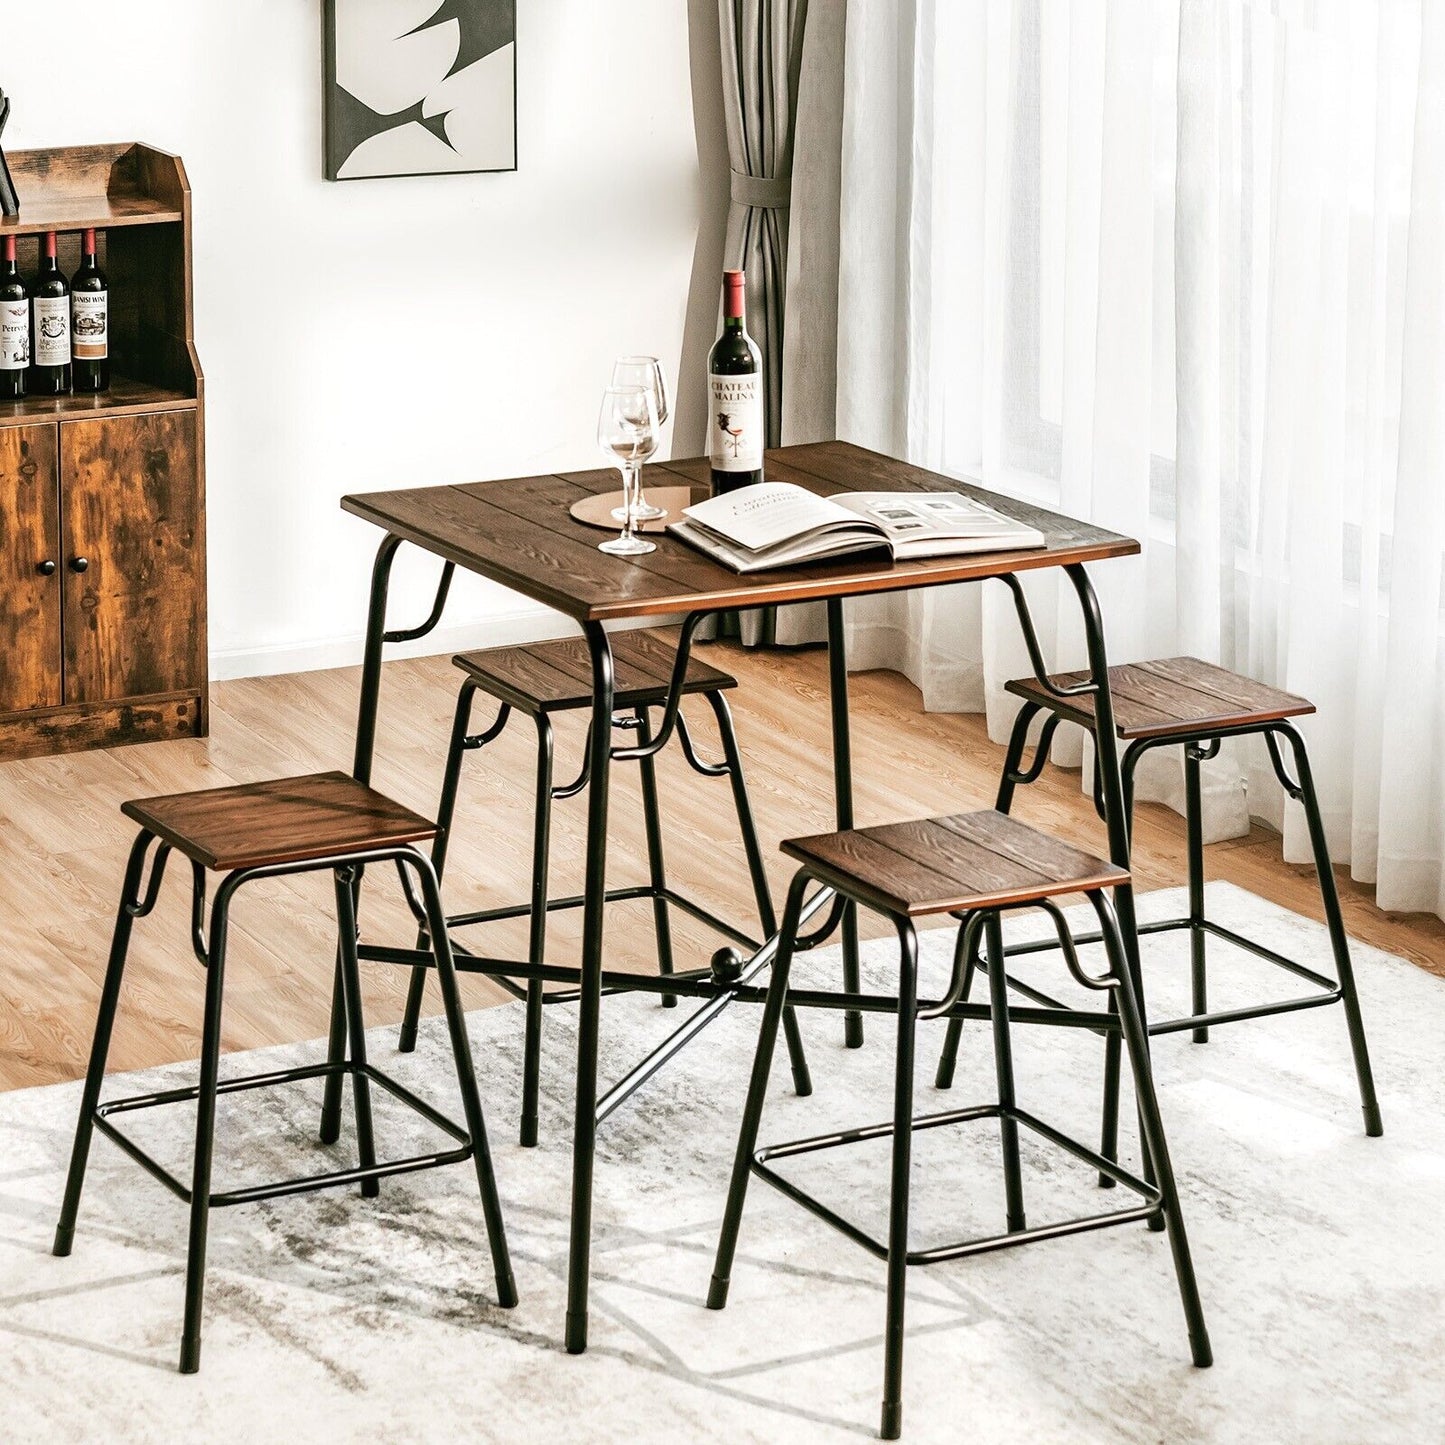 5 Piece Bar Table Set with Counter Height Backless Stools-Rustic Brown